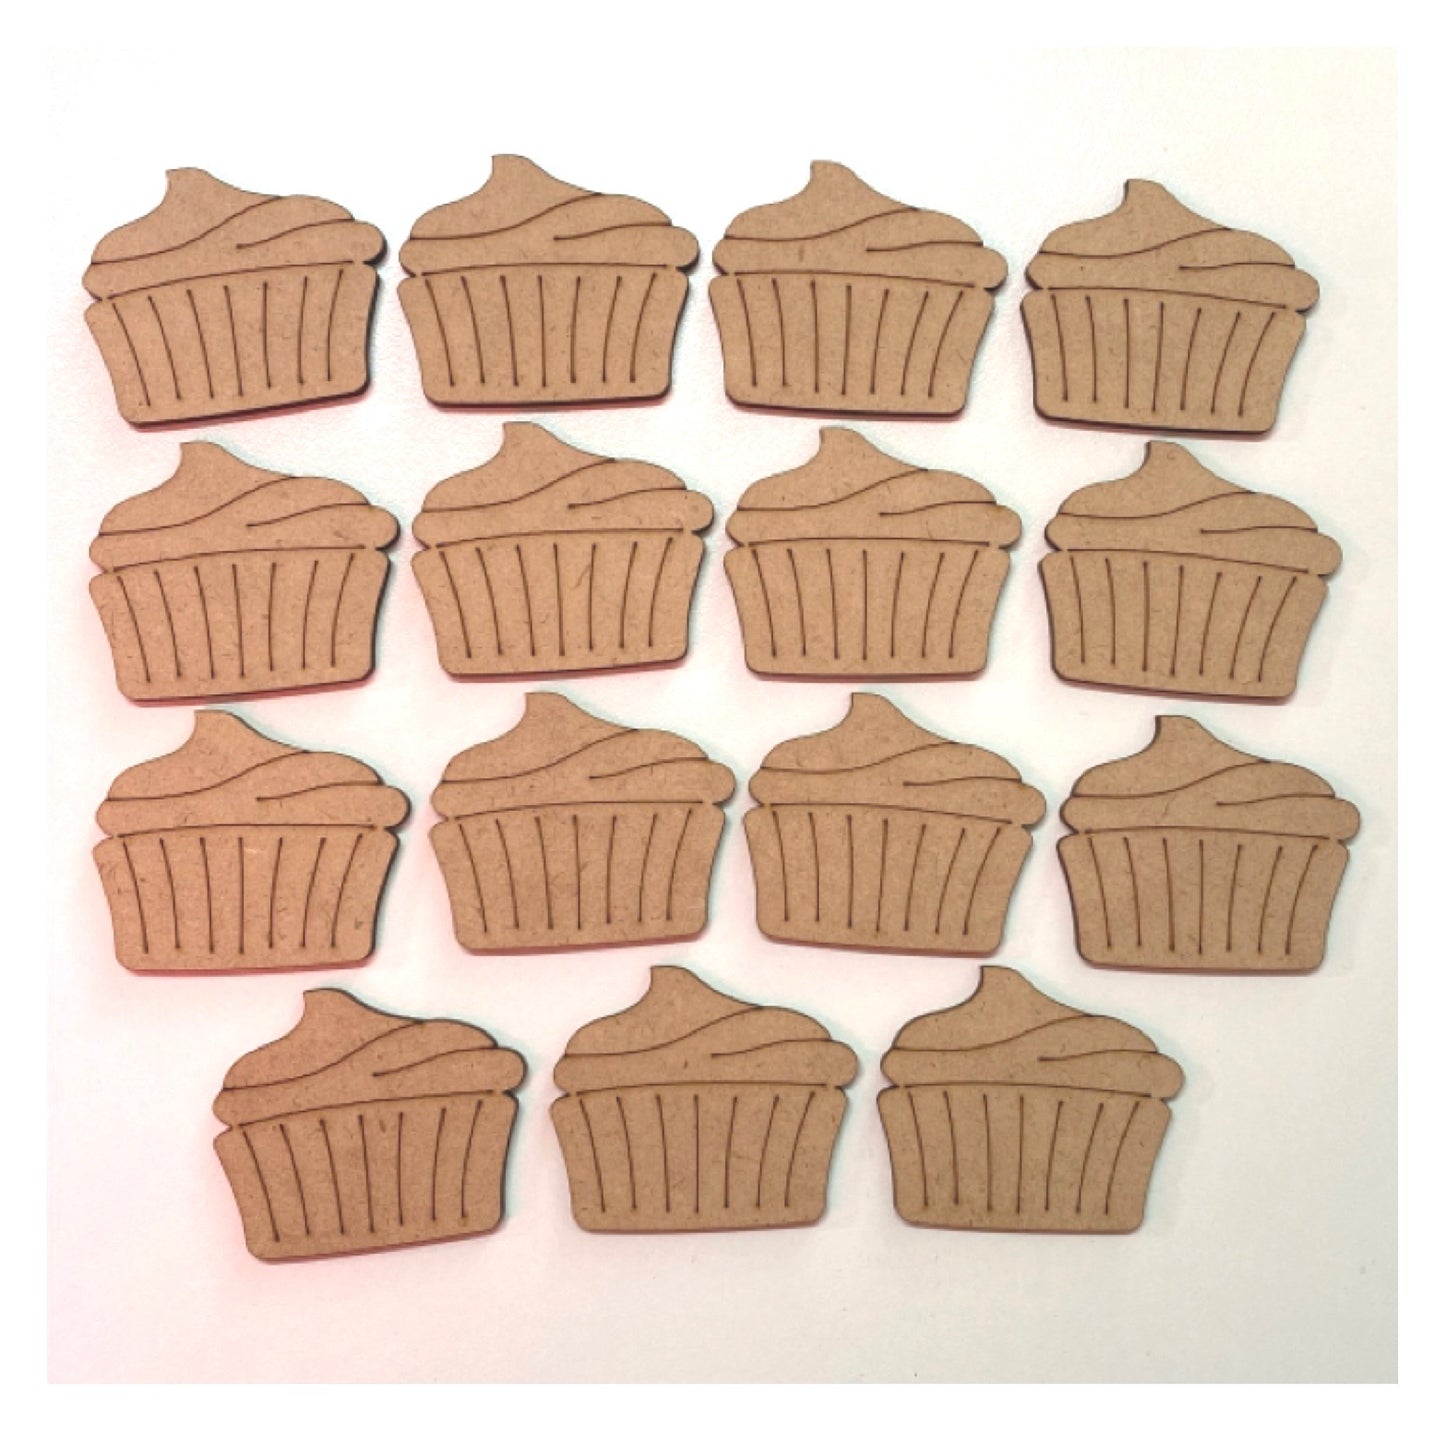 Cup Cakes set of 15 MDF Shape DIY Raw Cut Out Art Craft Décor